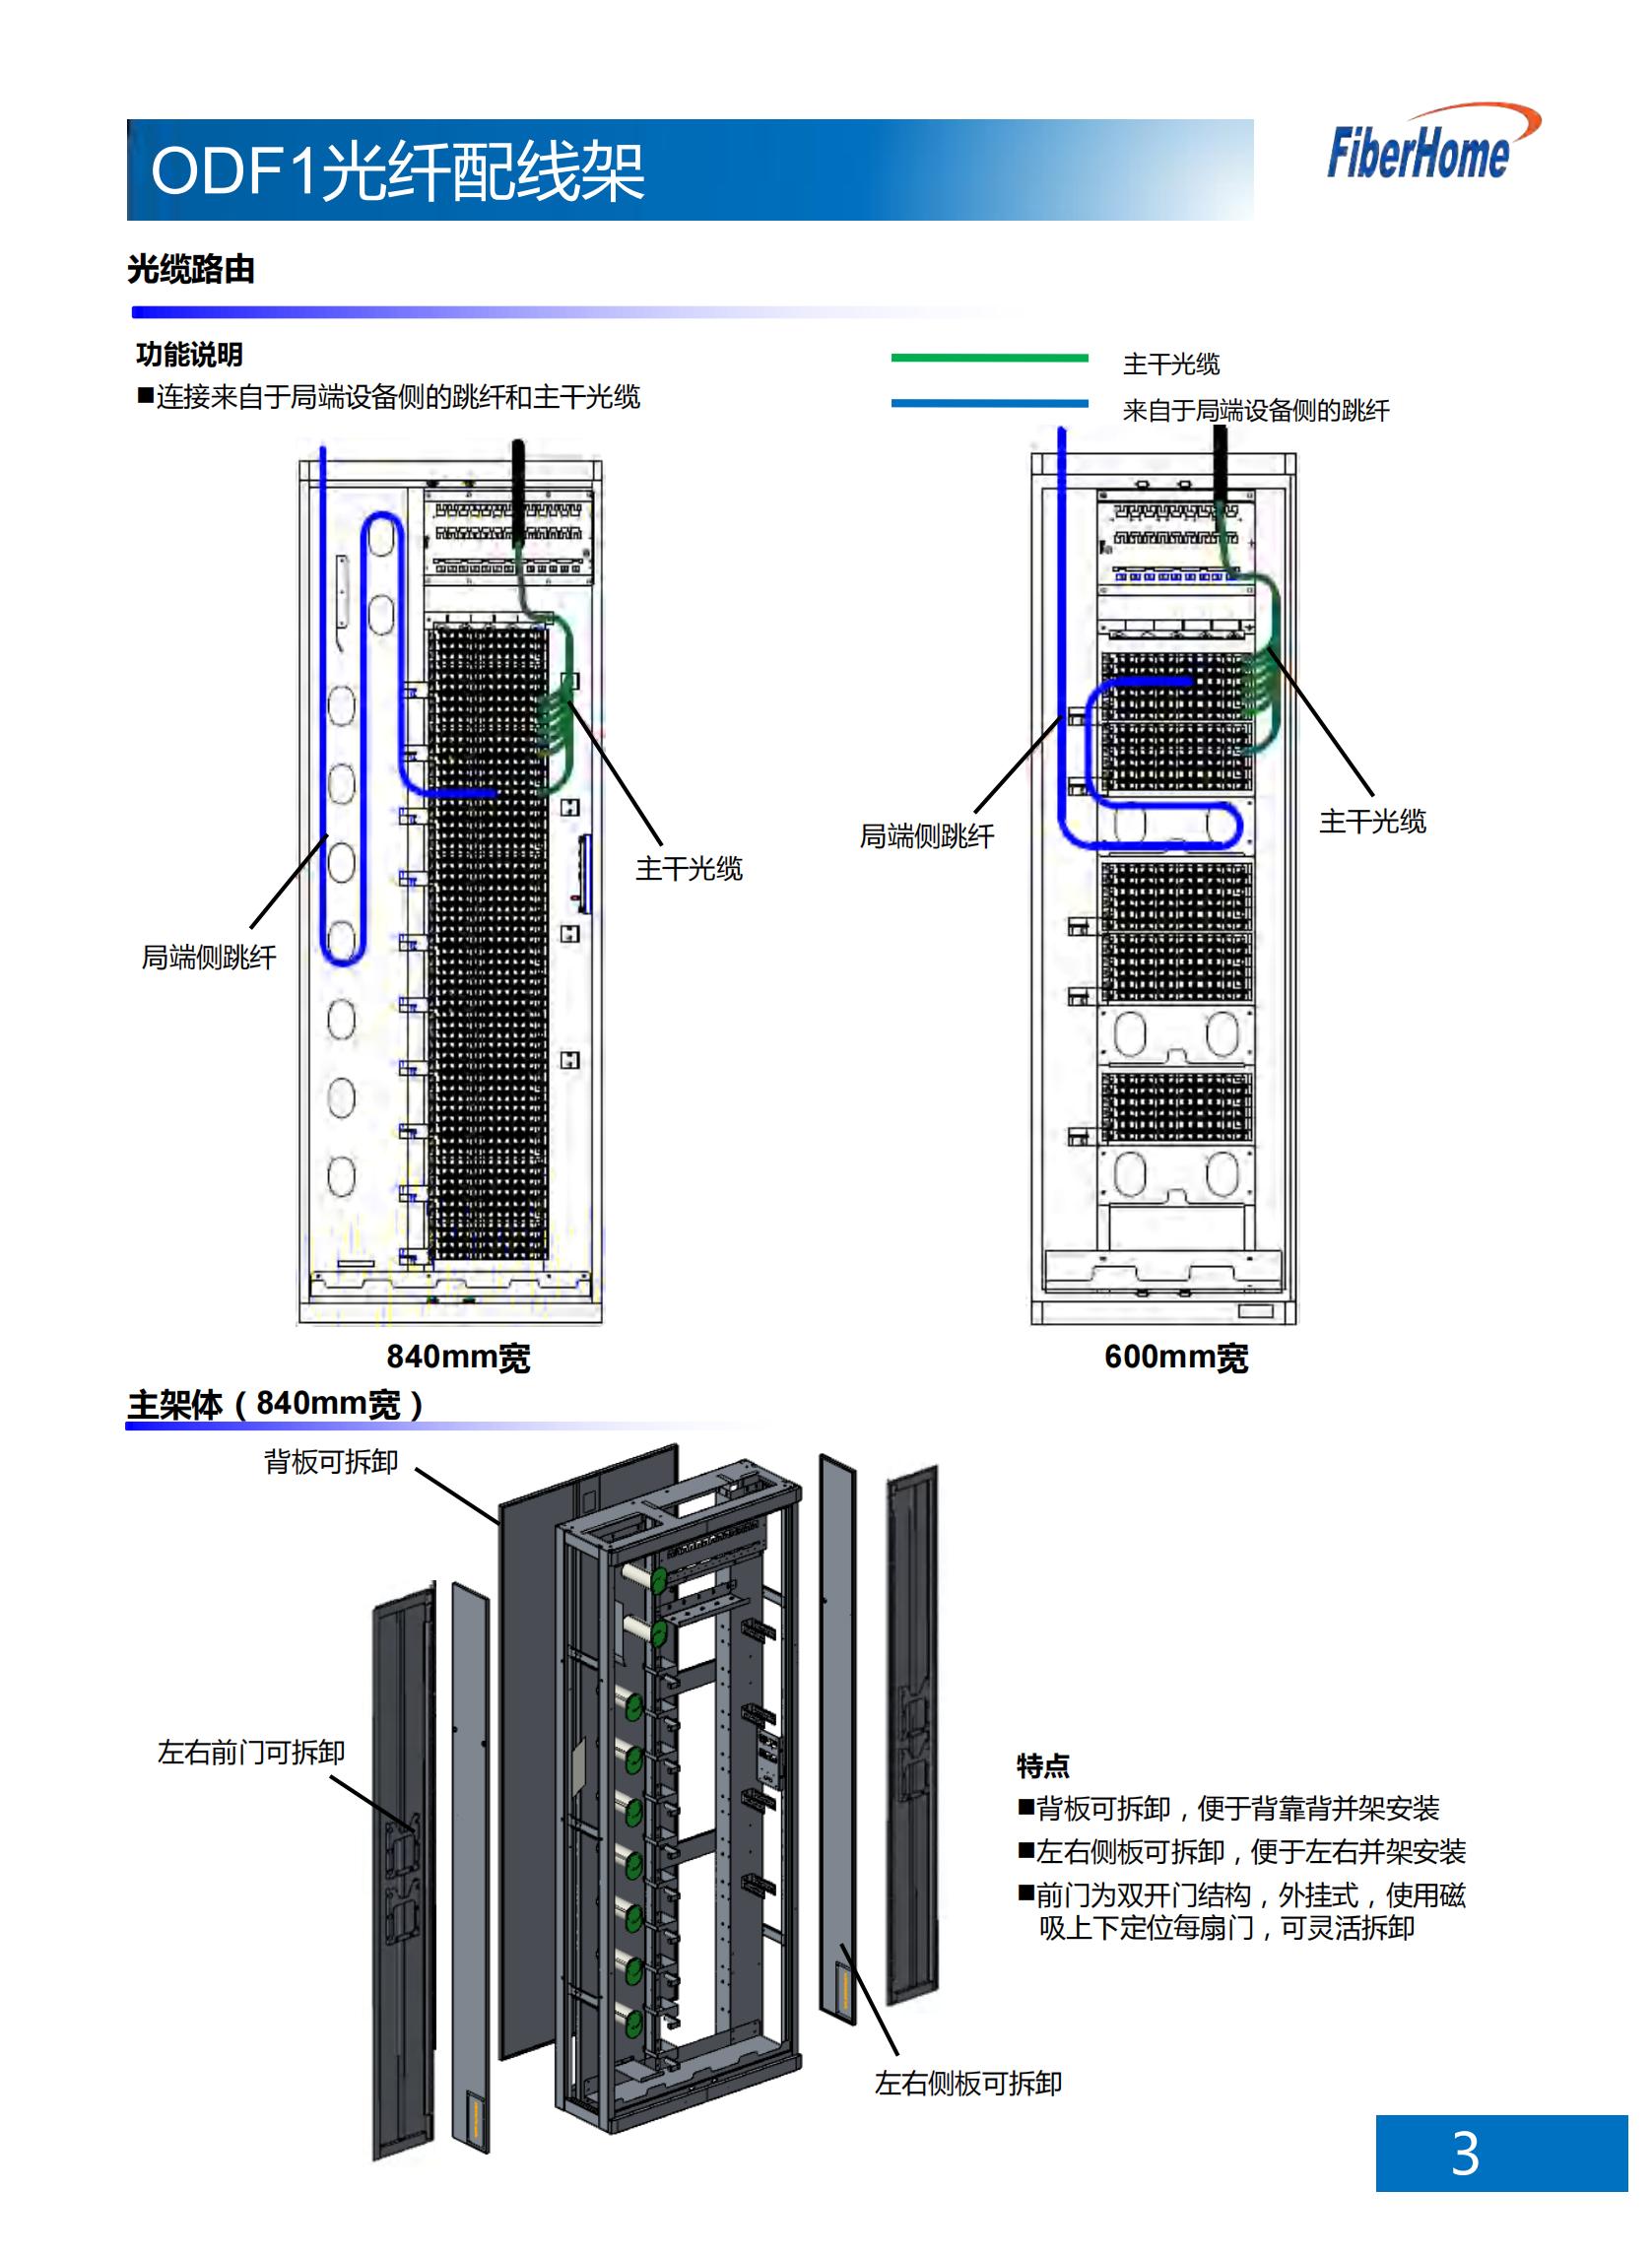 ODF101-1152-A3-LC ODF optical fiber distribution frame (576-core floor-standing sub-frame type with 24-core LC fusion integration unit)